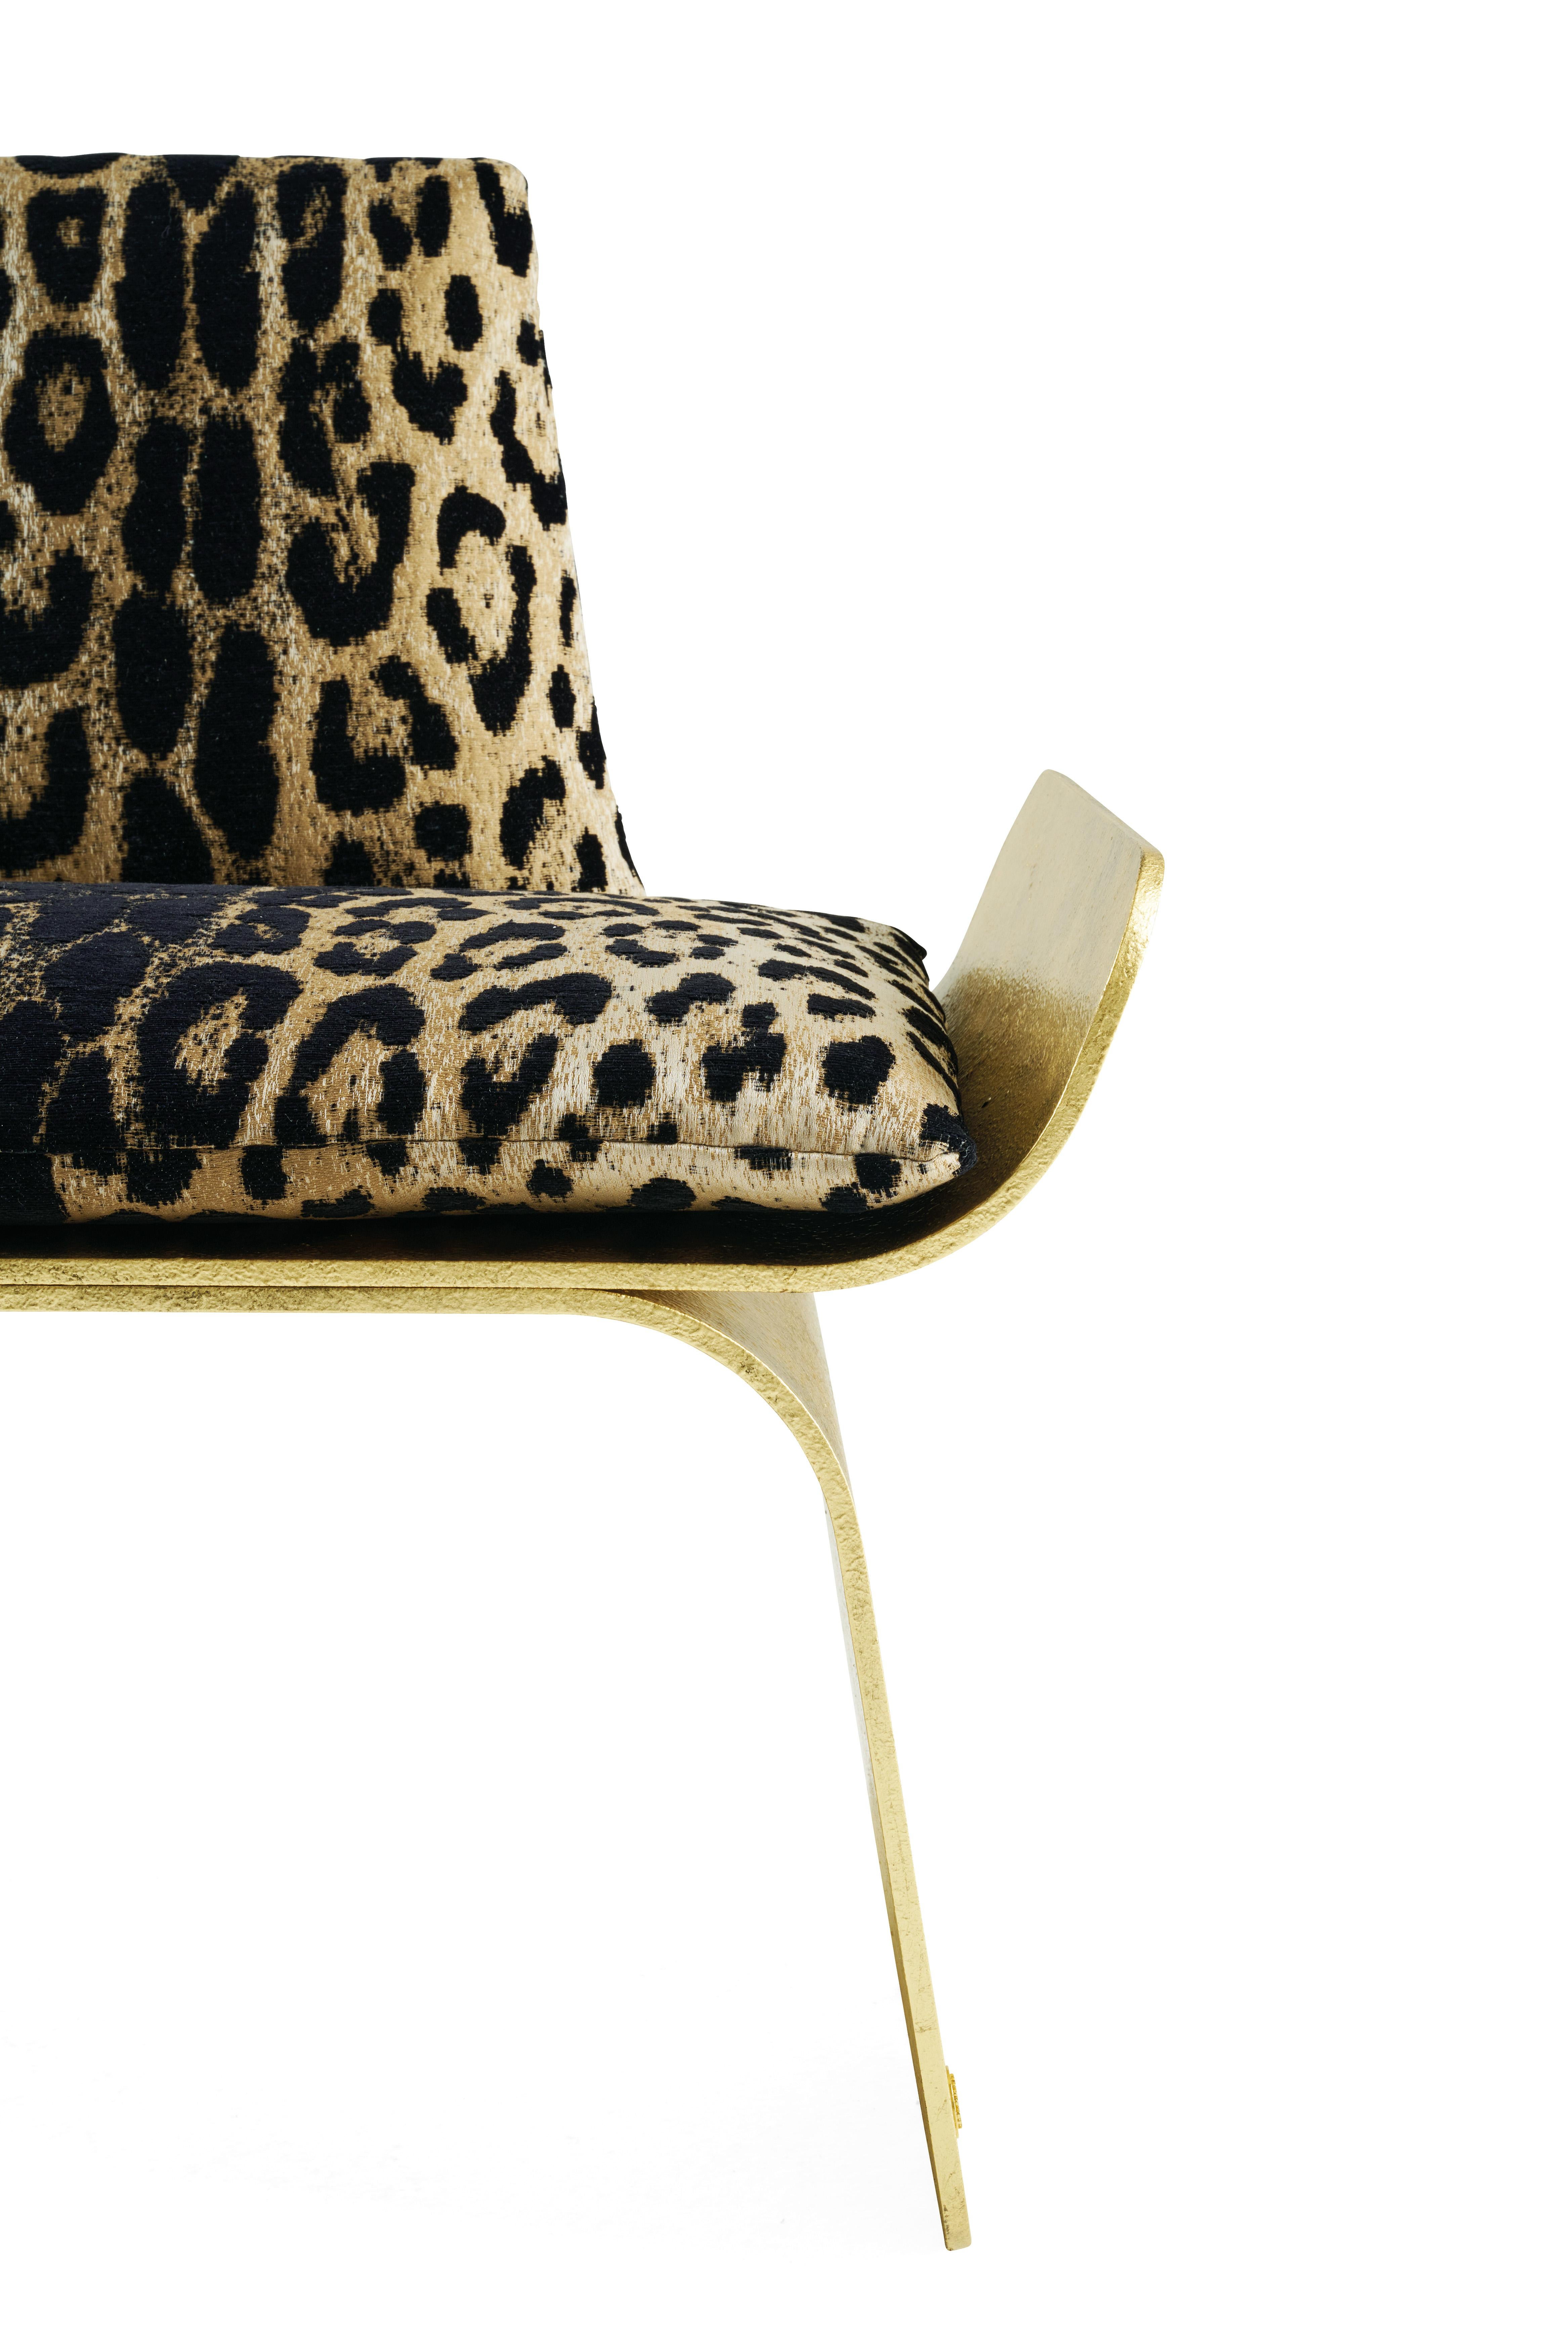 Contemporary 21st Century Iranja Armchair in Jacquard by Roberto Cavalli Home Interiors For Sale